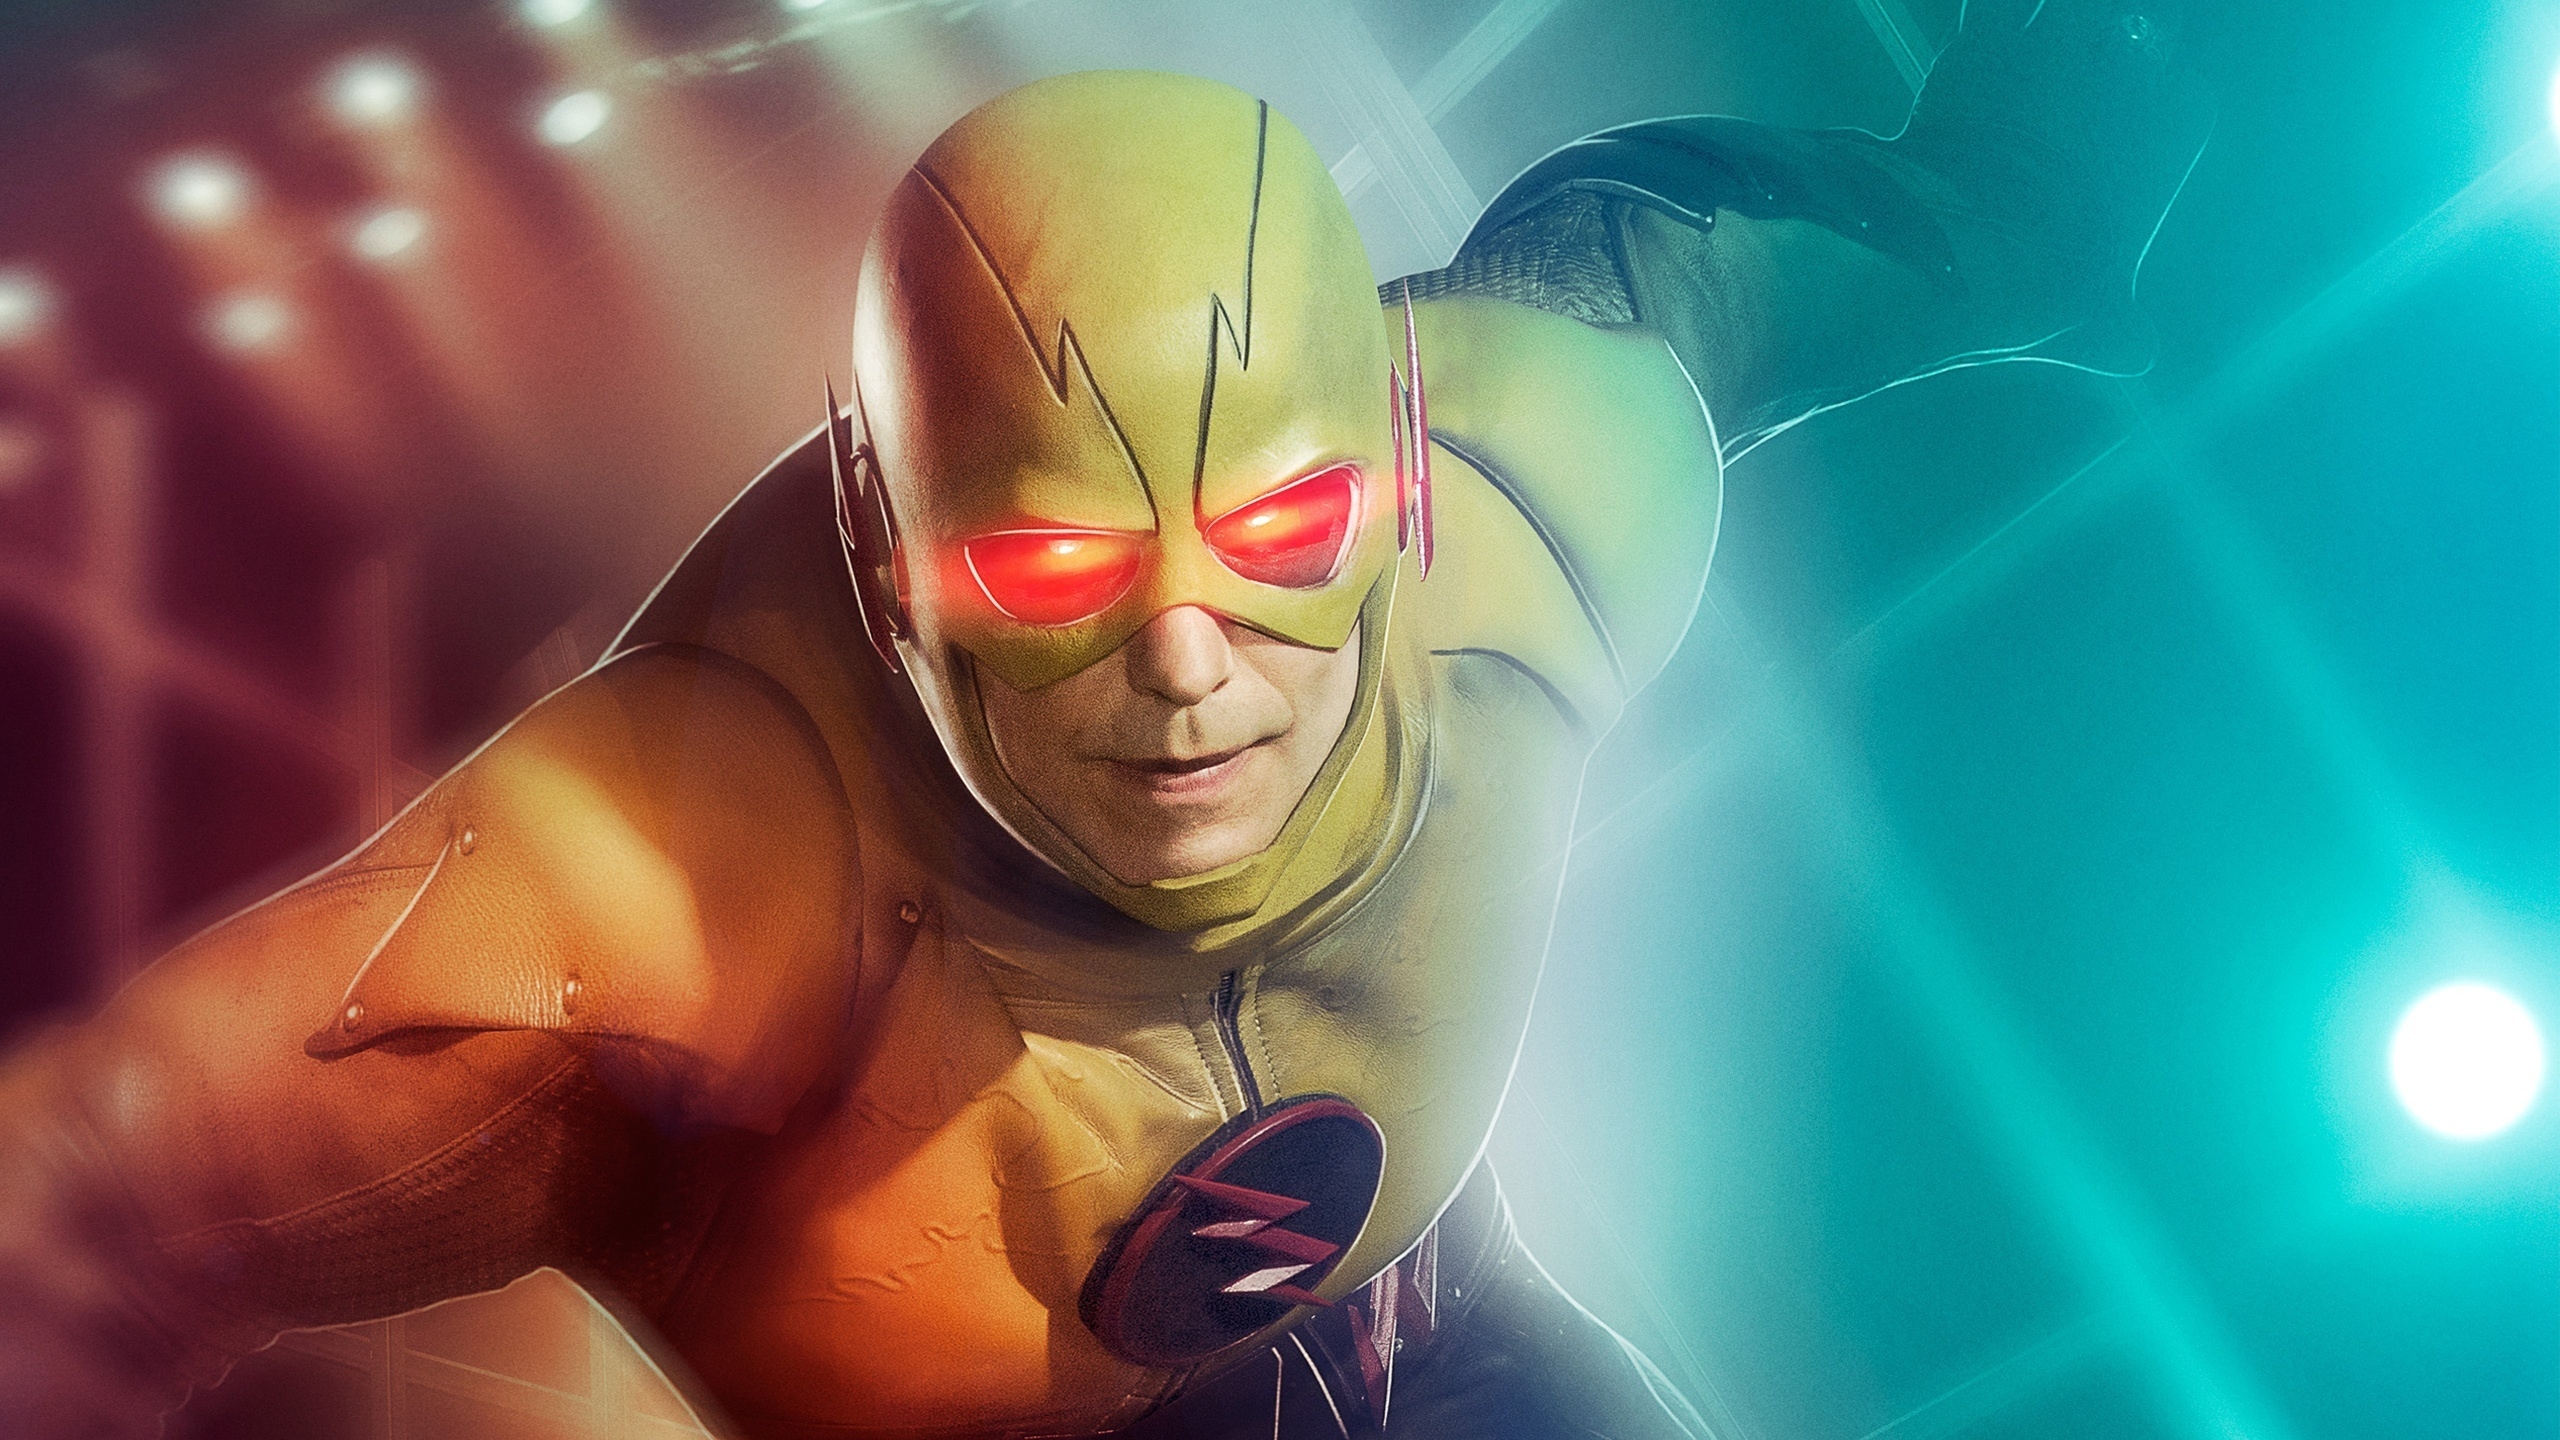 The Flash Character for 2560x1440 HDTV resolution